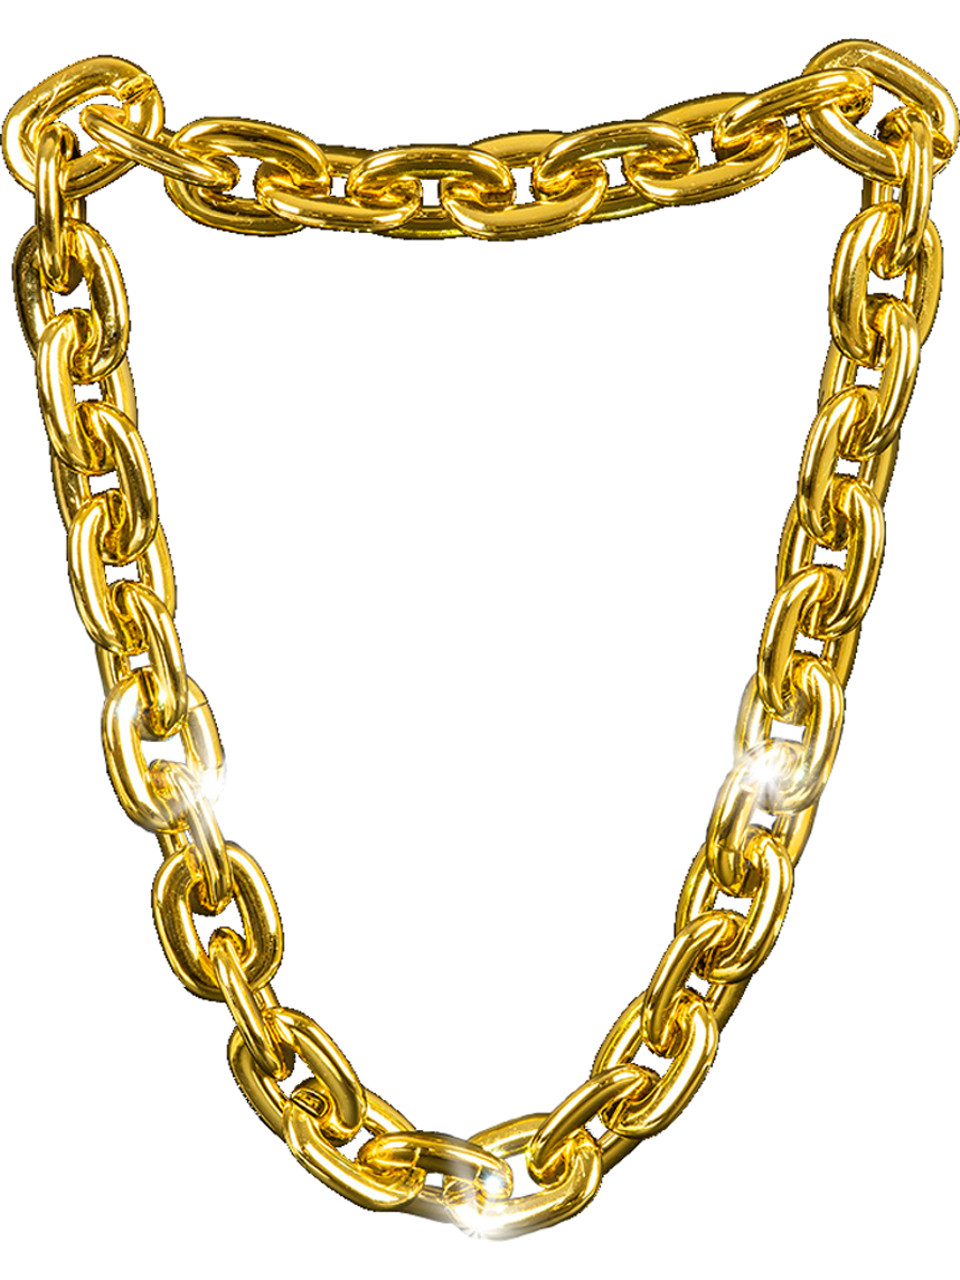 PinCute 2 Pack Big Chunky Gold Chain for Men, 32 Inches Fake Plastic Gold  Chain Necklace, 80s 90s Punk Style Hip Hop Chain Necklace for Costume  Jewelry Rapper | Amazon.com